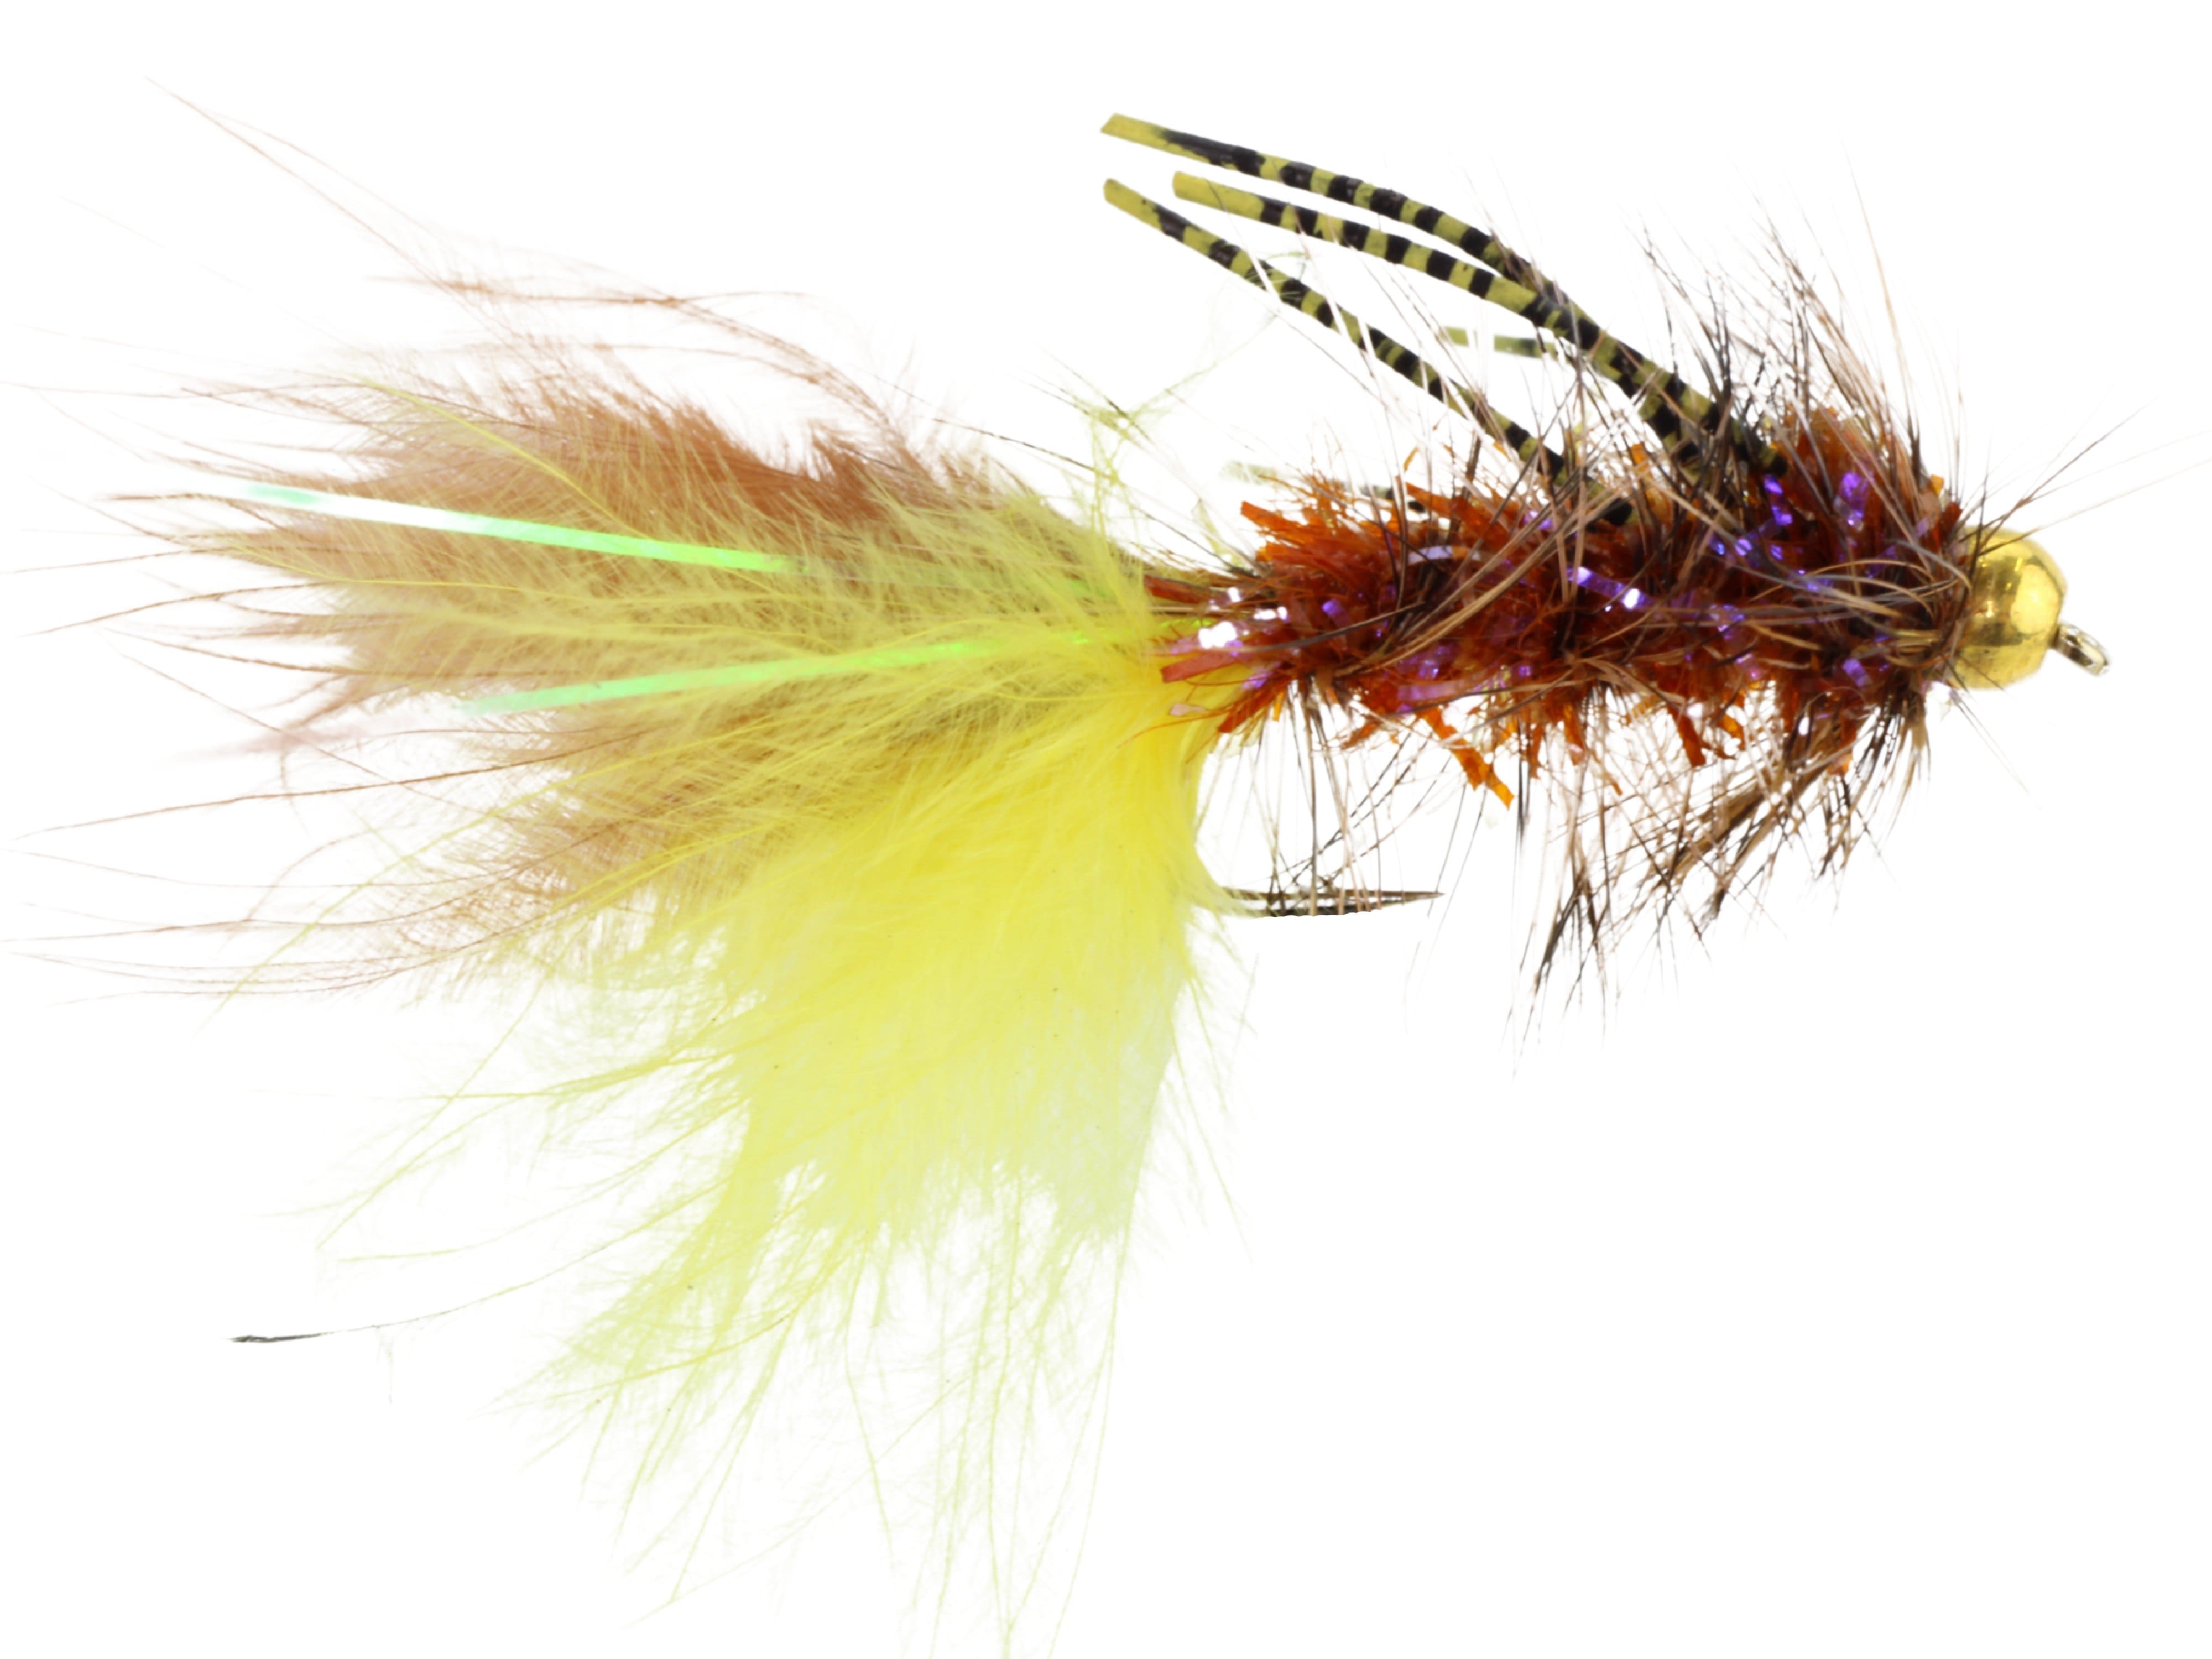 Wild Water Fly Fishing Bead Head Yellow and Brown Rubber Leg Wooly Bugger, size 10, qty. 6